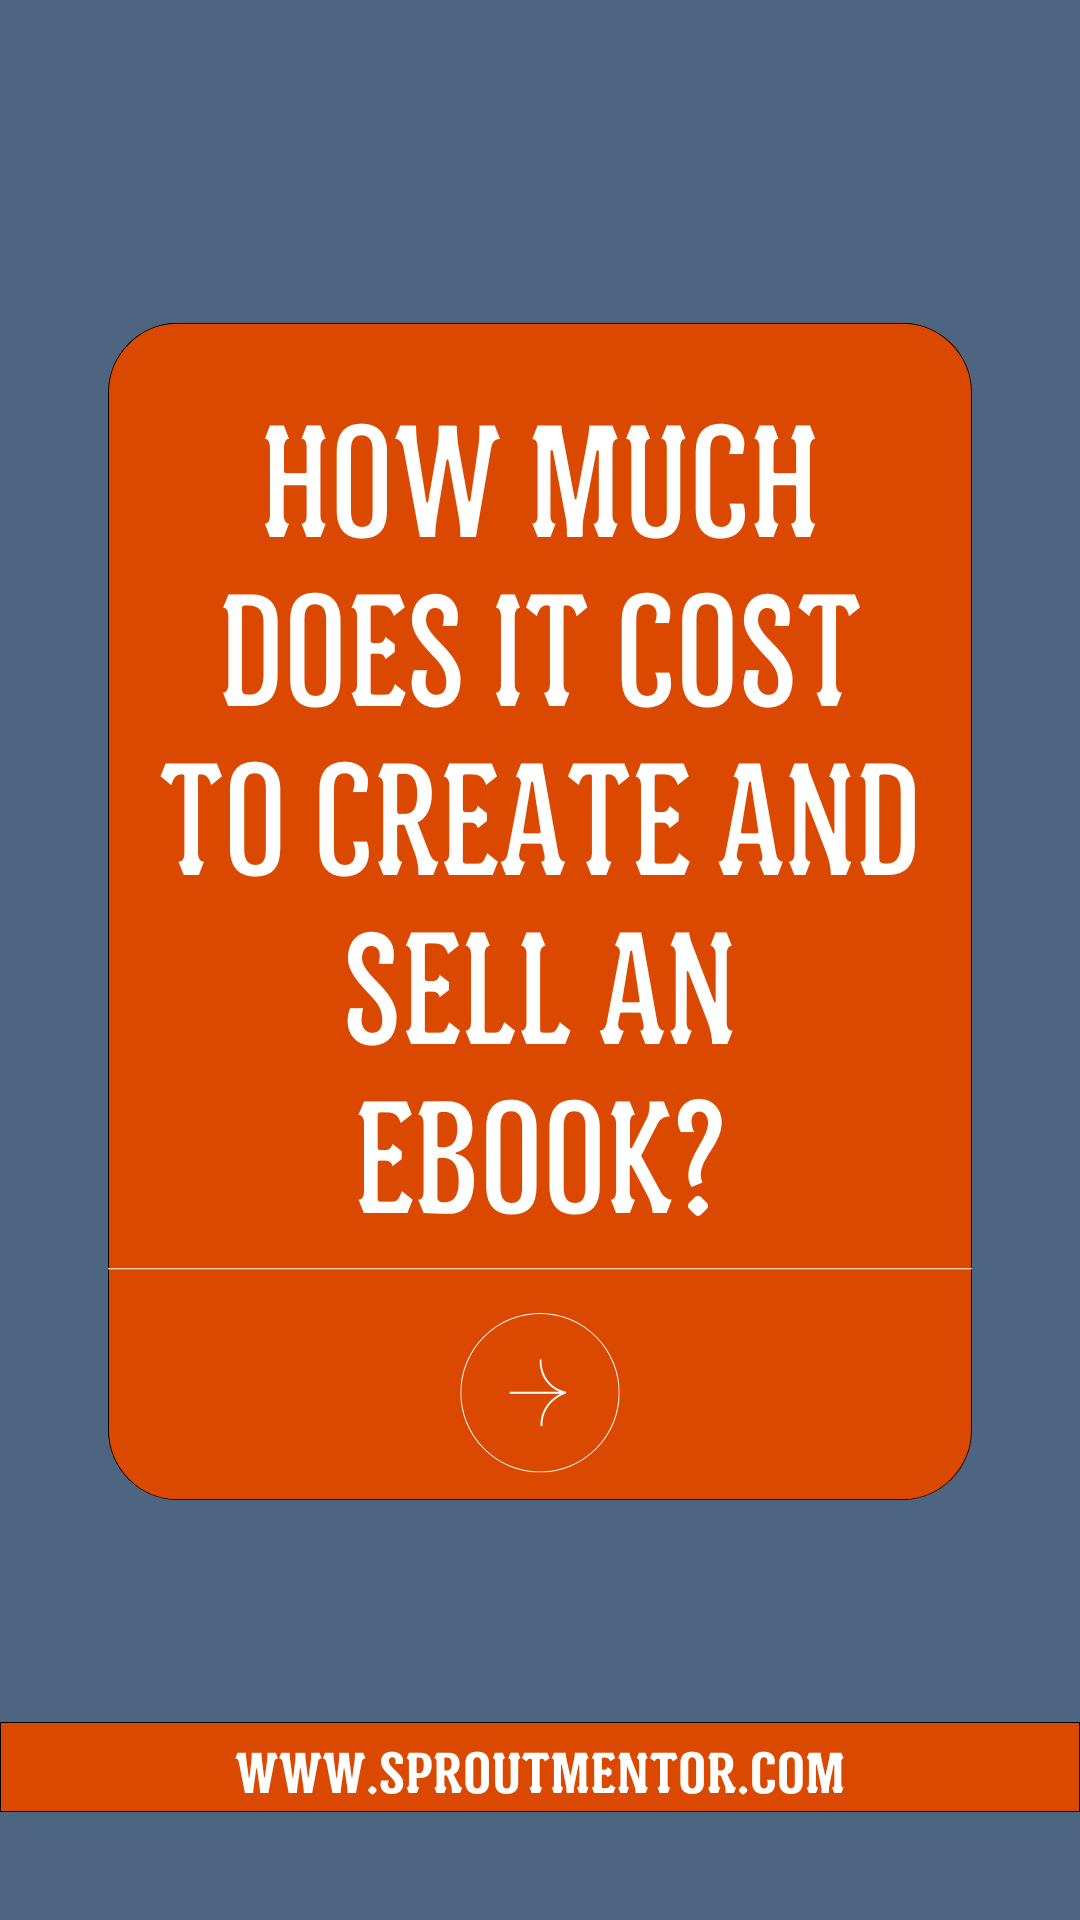 How Much Does It Cost To Create And Sell An Ebook?